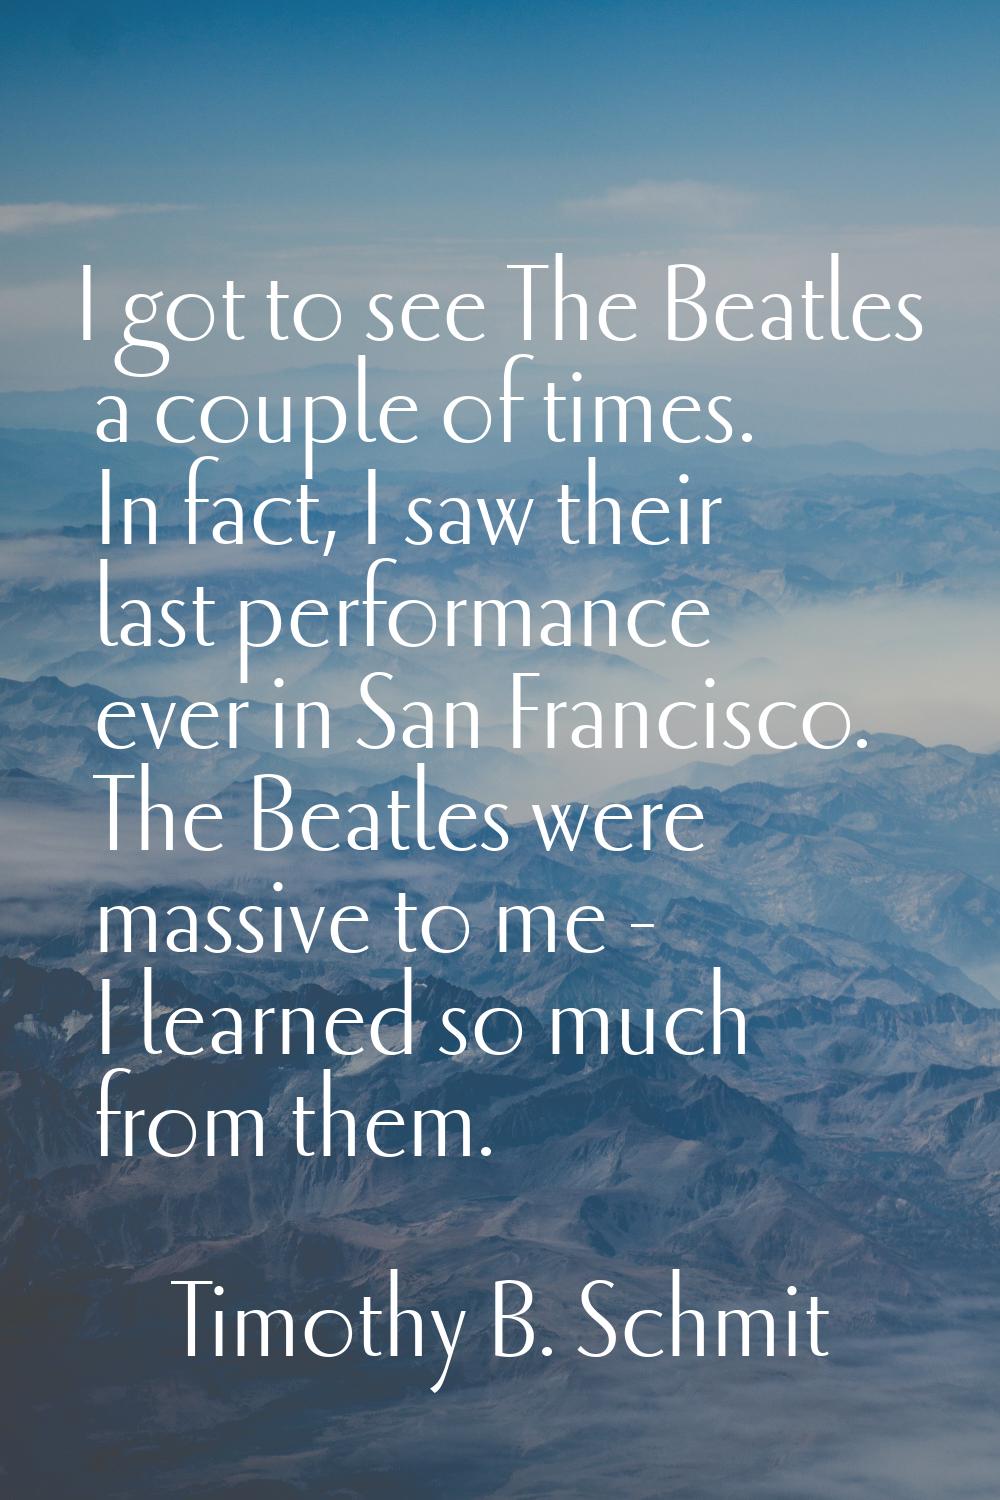 I got to see The Beatles a couple of times. In fact, I saw their last performance ever in San Franc